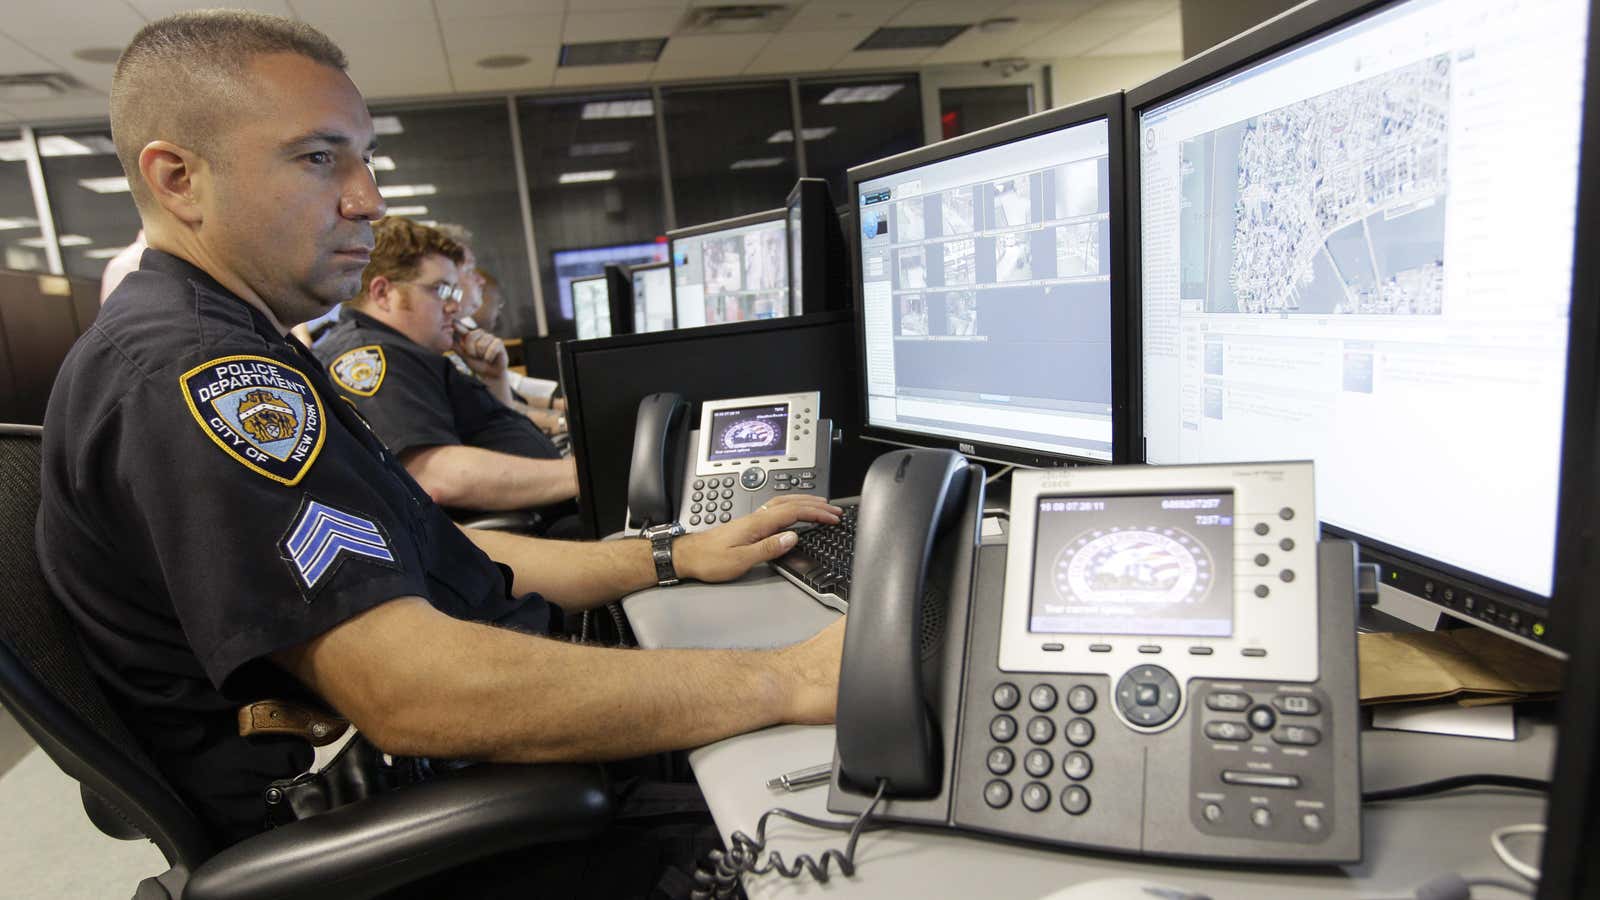 FILE – In this Thursday, July 28, 2011 file photo, police officers look at computer monitors in the operations center of the Lower Manhattan Security…